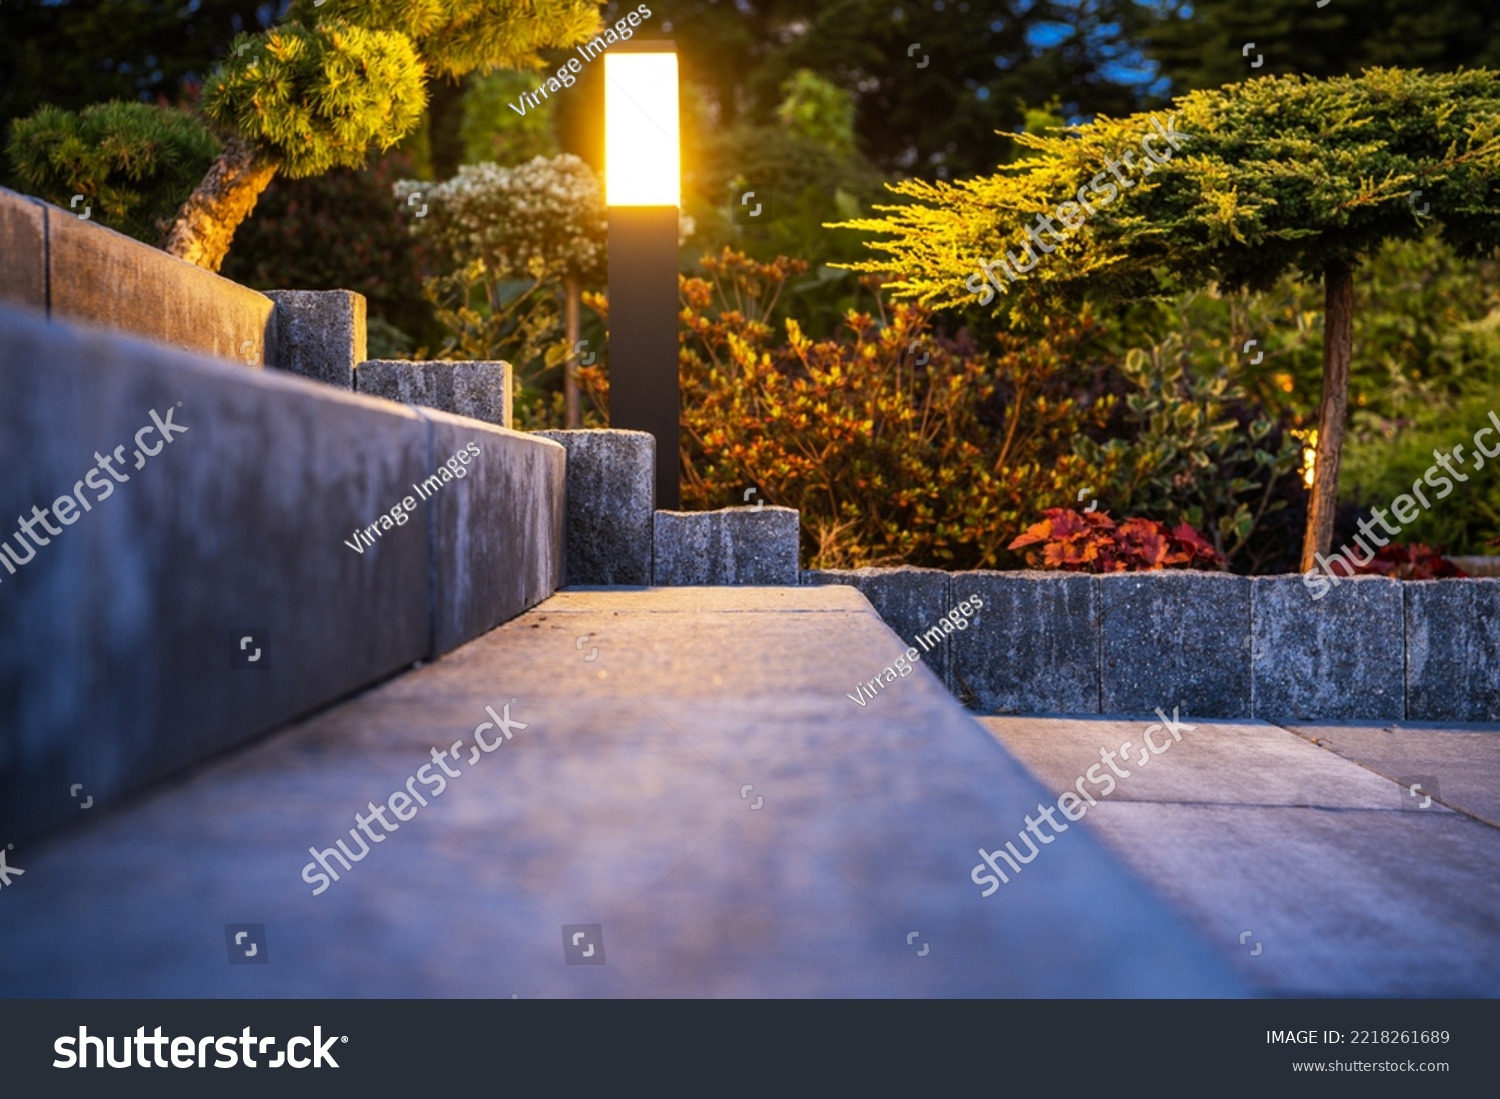 Outdoor Garden Light Installed Along Concrete Backyard Stairs Lighting Them Up in the Evening. Landscaped Garden in the Background. #2218261689